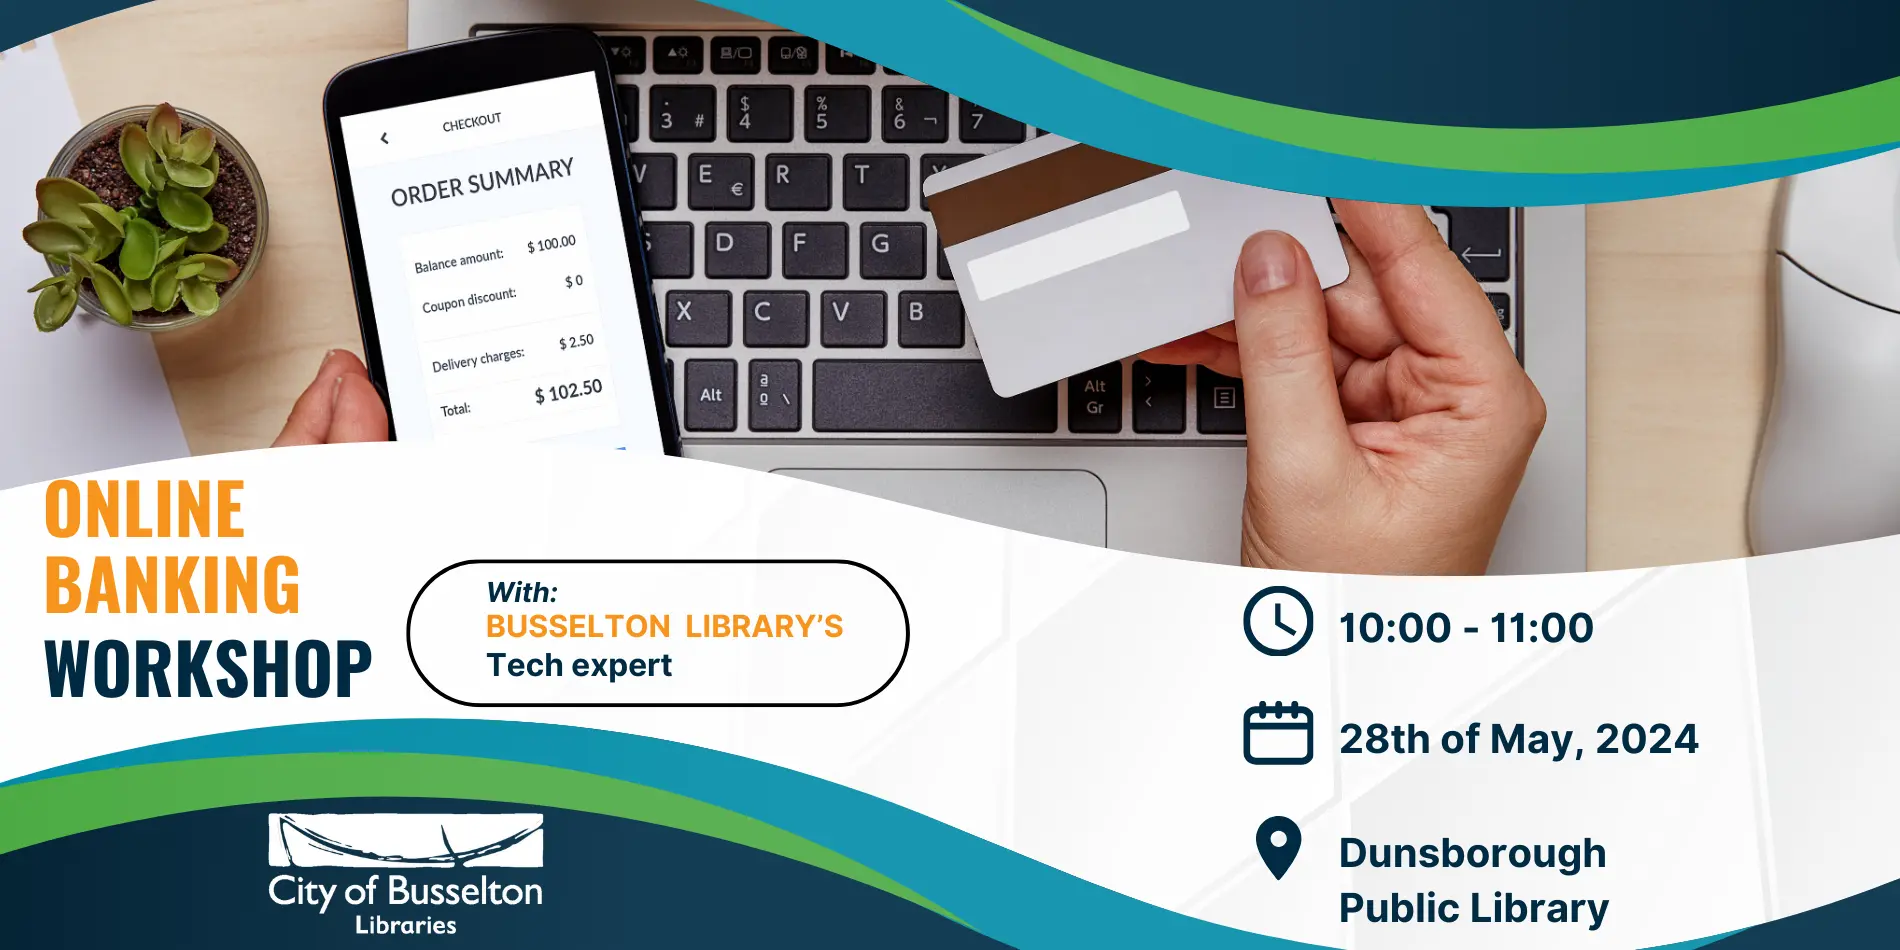 Online Banking Workshop will be held in Busselton Library on the 28th of May 2024 at 10am.